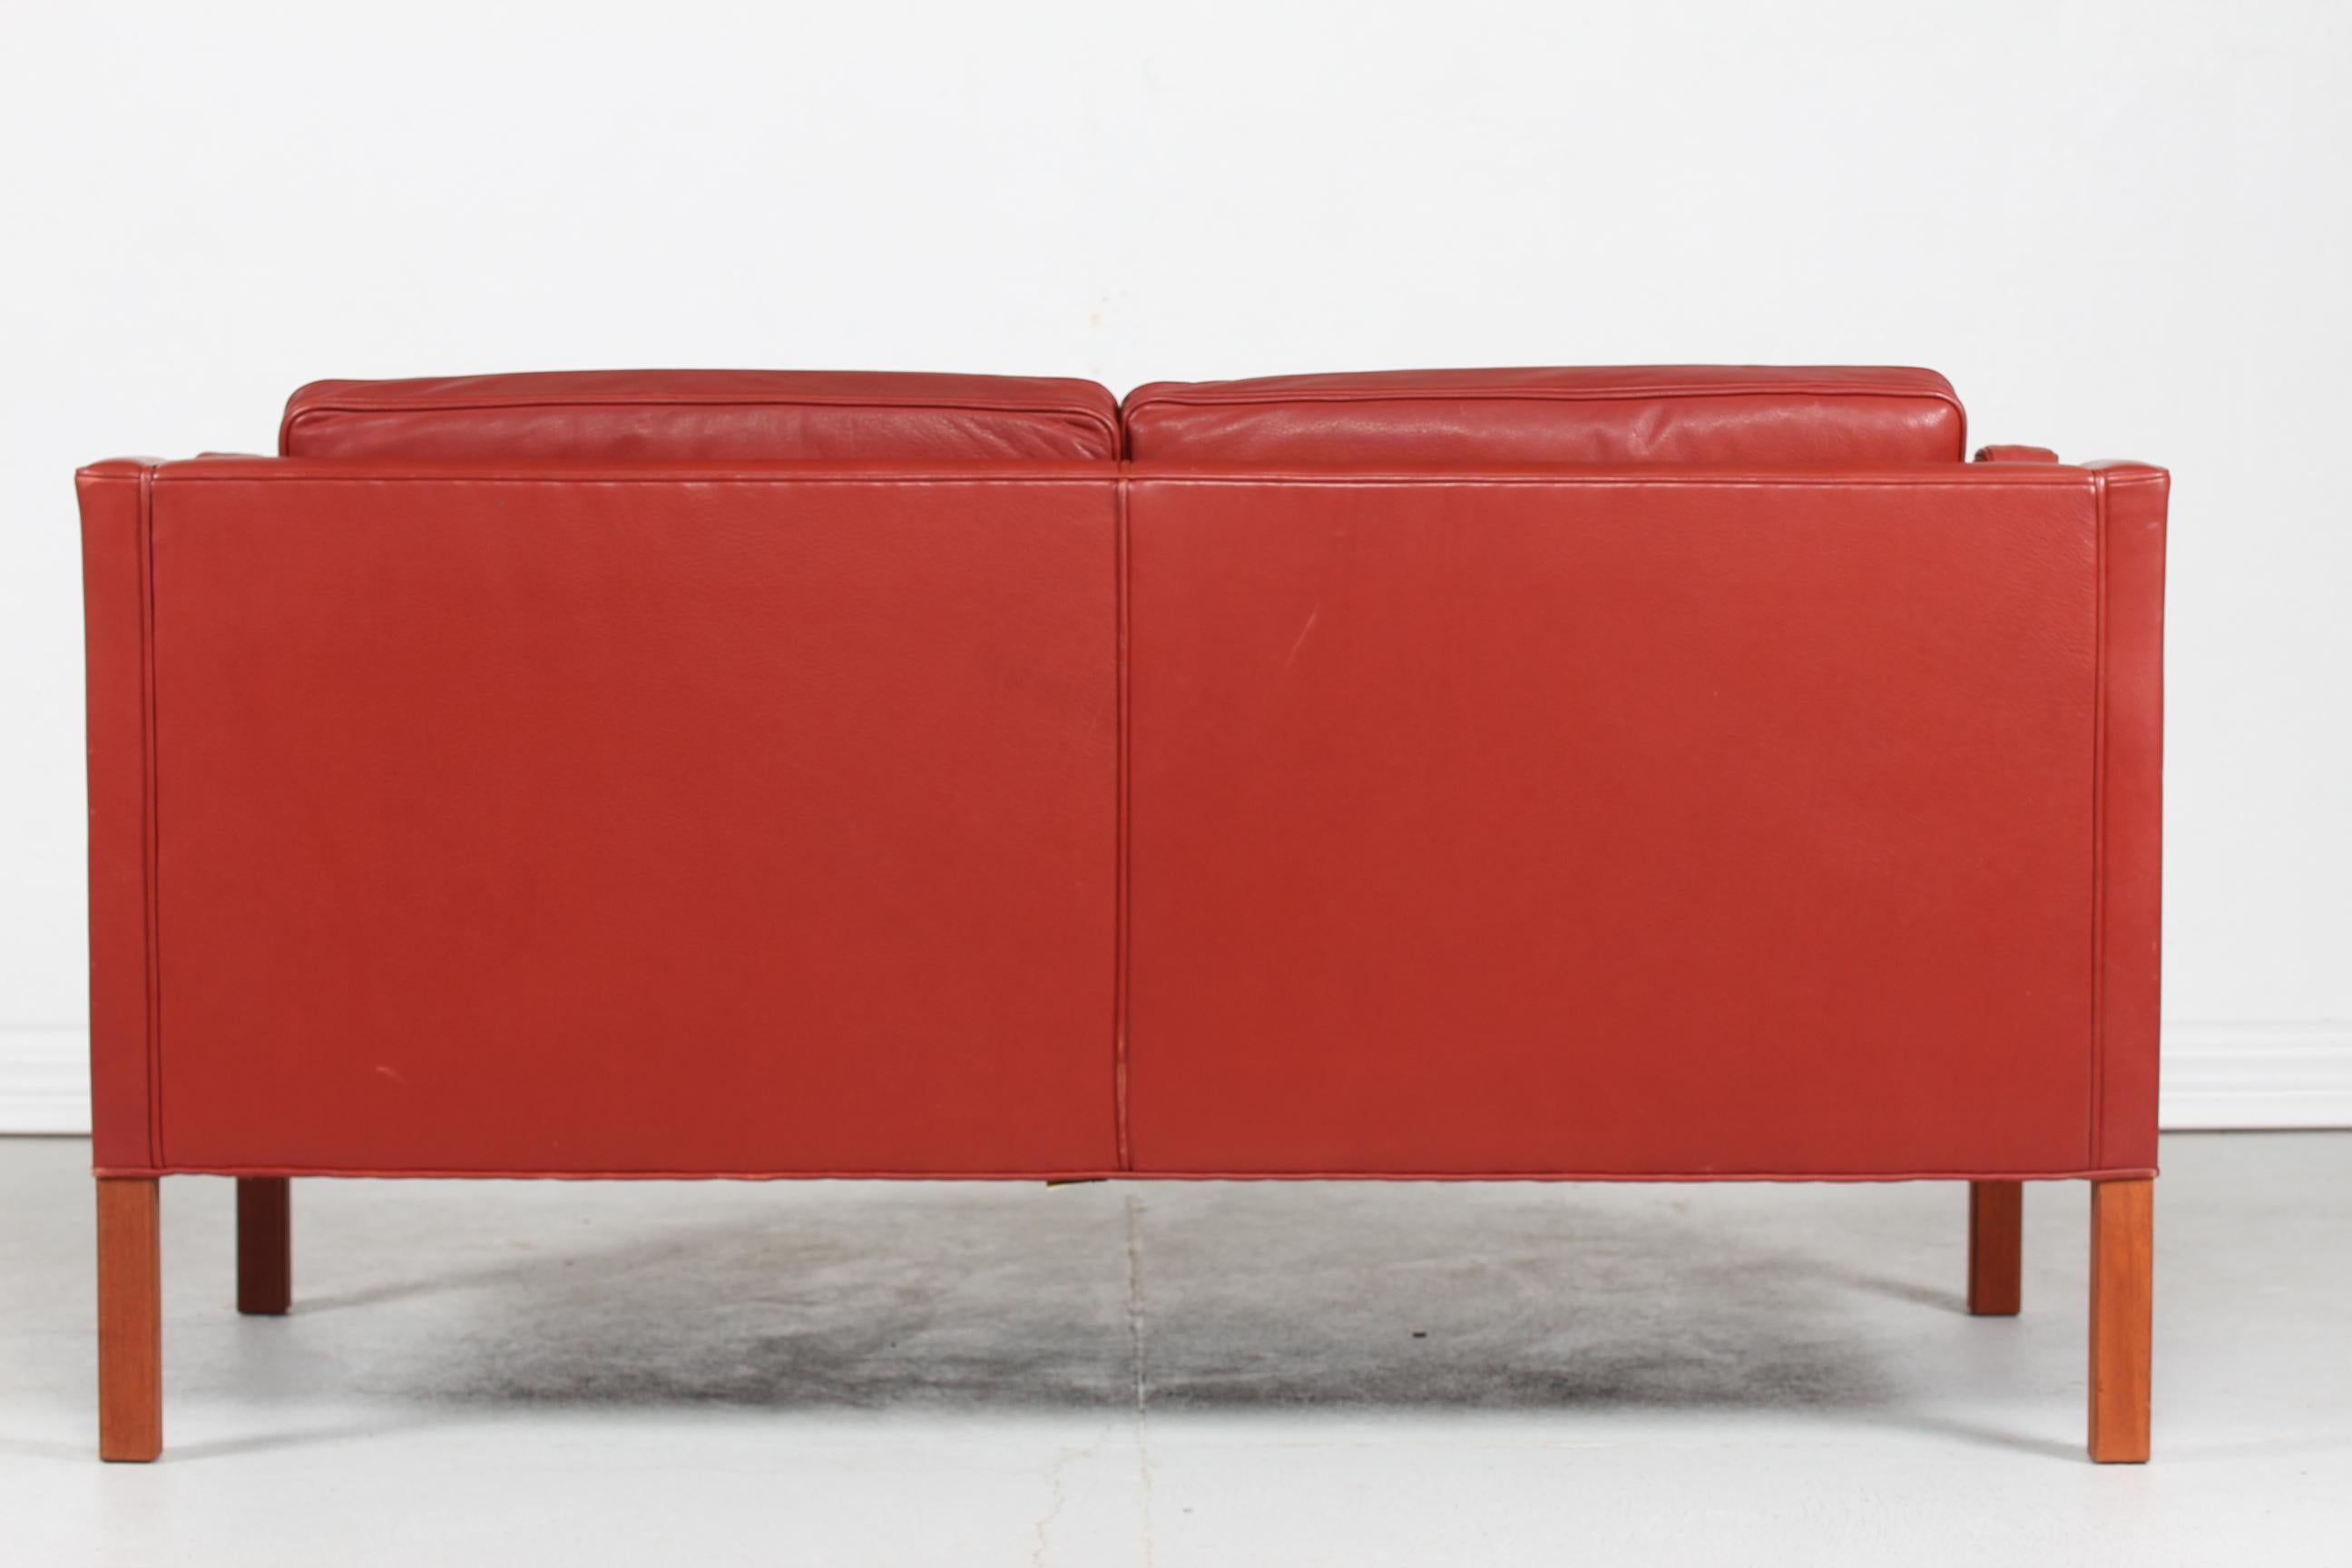 Danish Børge Mogensen Sofa 2212 with Red Brown Leather by Fredericia Stolefabrik, 1982